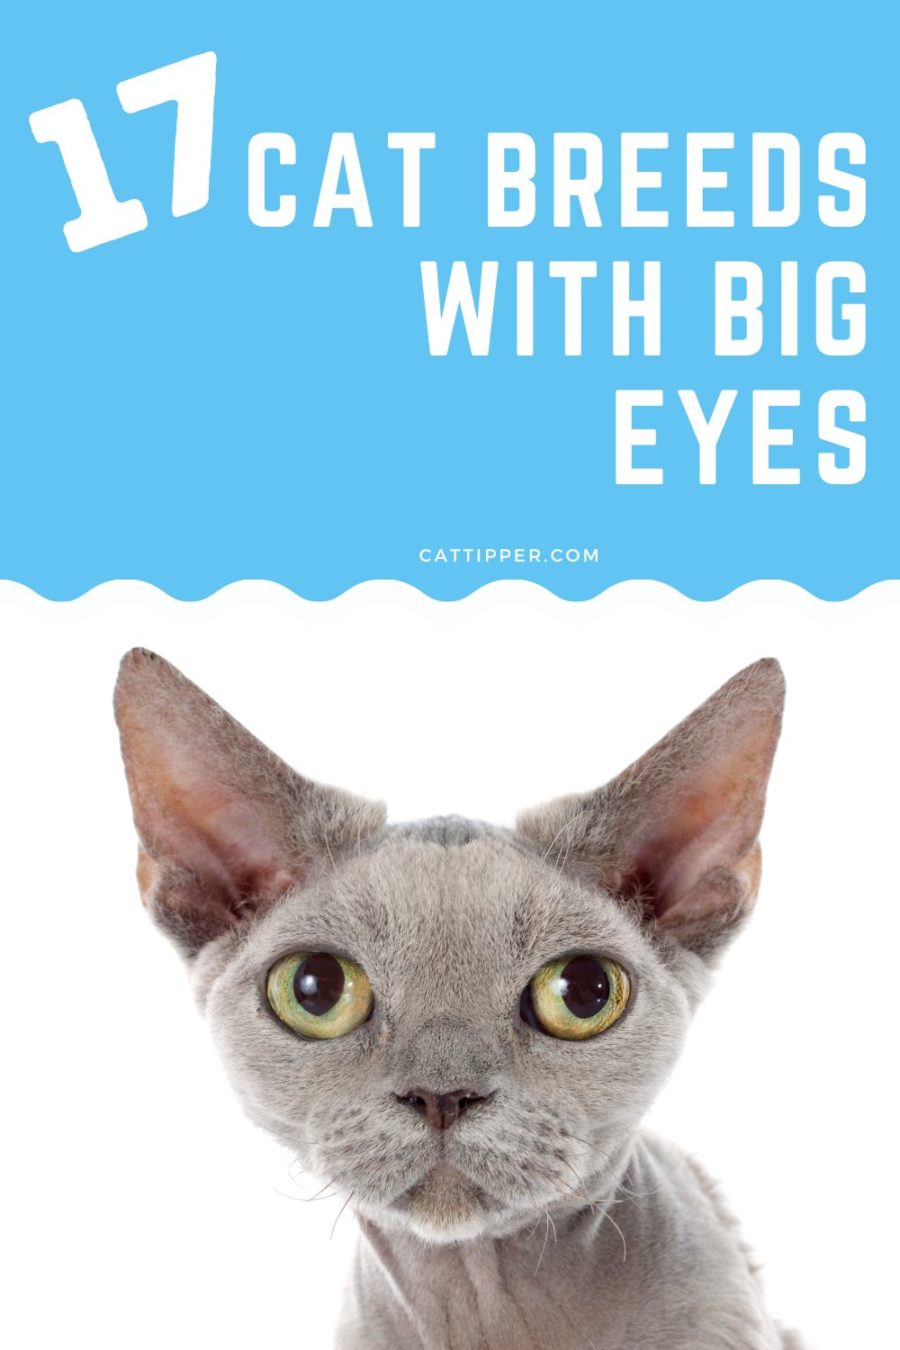 17 Cat Breeds with Big Eyes